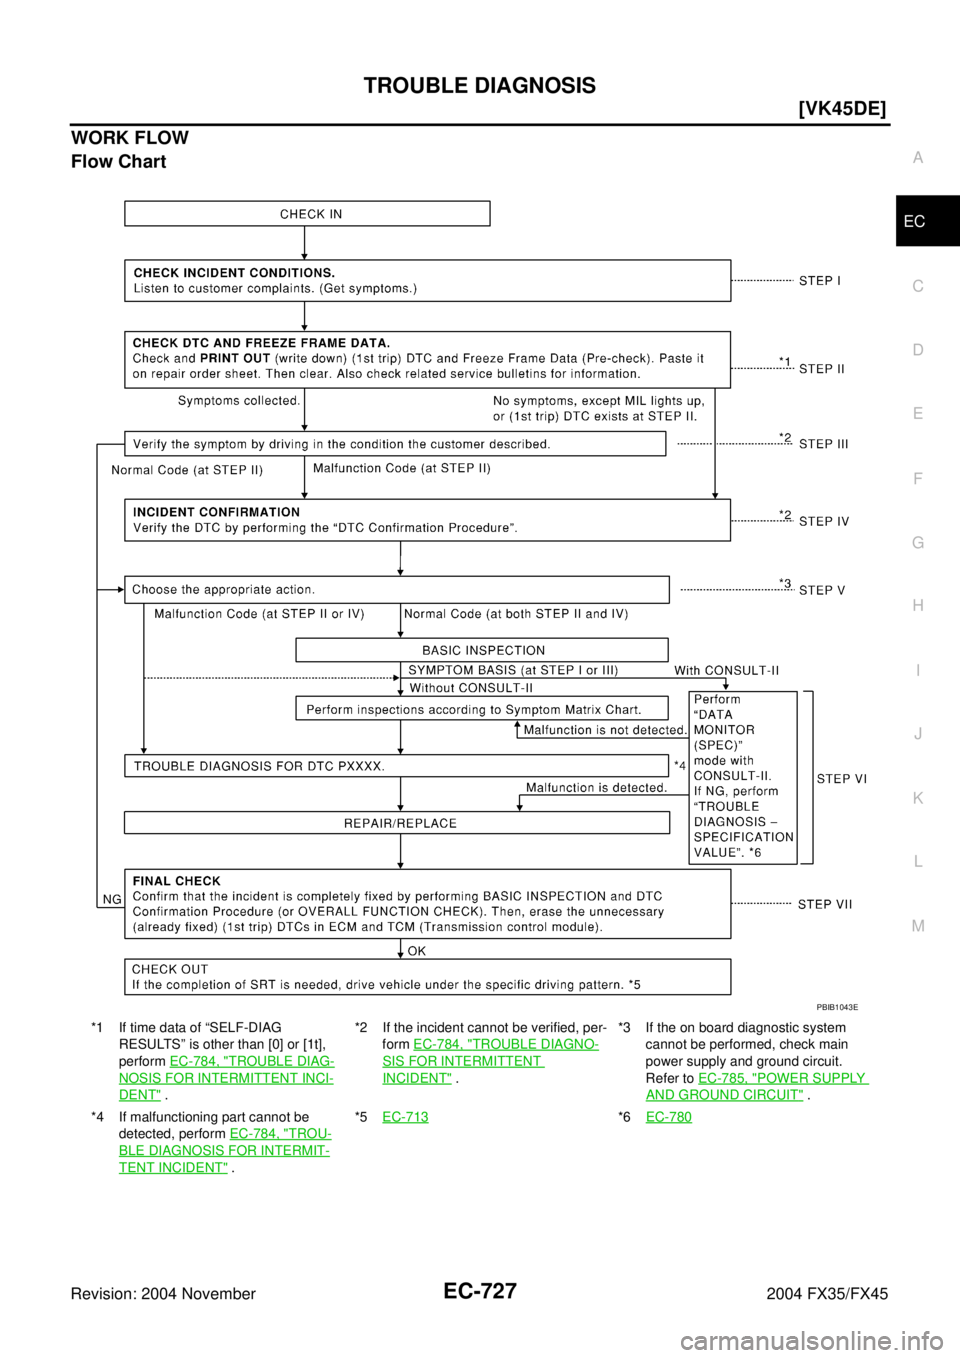 INFINITI FX35 2004  Service Manual TROUBLE DIAGNOSIS
EC-727
[VK45DE]
C
D
E
F
G
H
I
J
K
L
MA
EC
Revision: 2004 November 2004 FX35/FX45
WORK FLOW
Flow Chart
*1 If time data of “SELF-DIAG 
RESULTS” is other than [0] or [1t], 
perform 